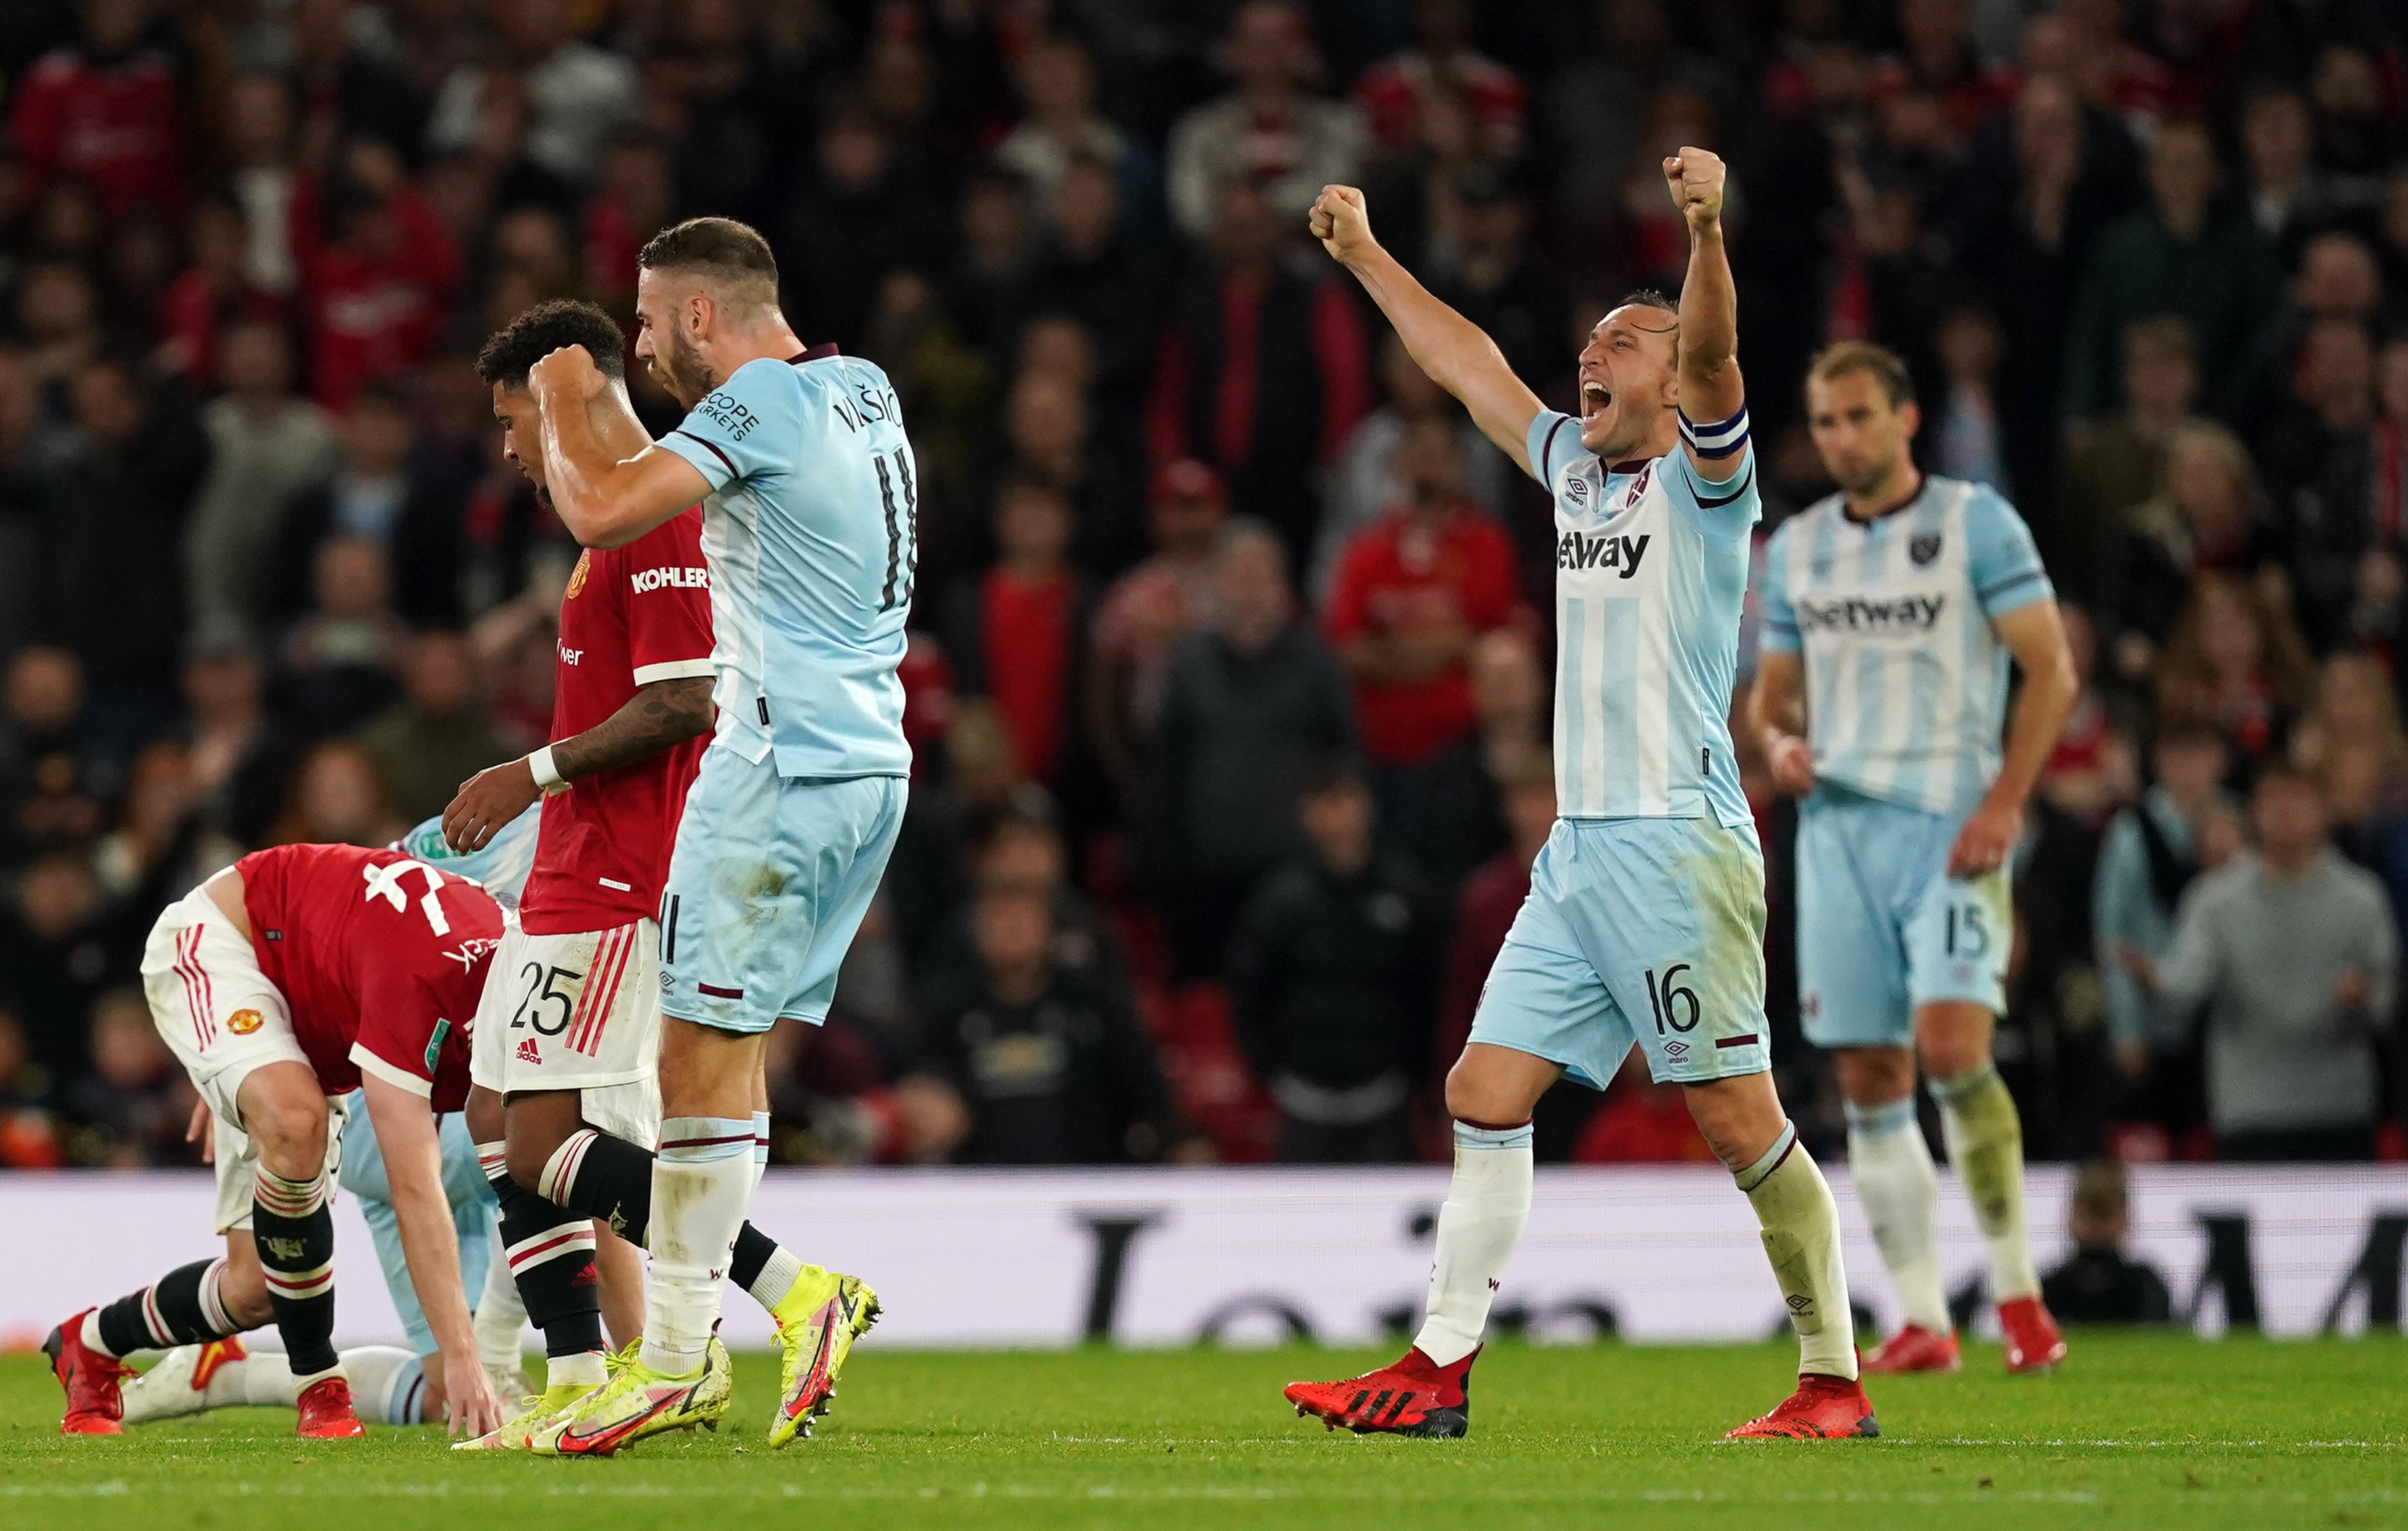 West Ham celebrated a memorable win at Old Trafford (Martin Rickett/PA)